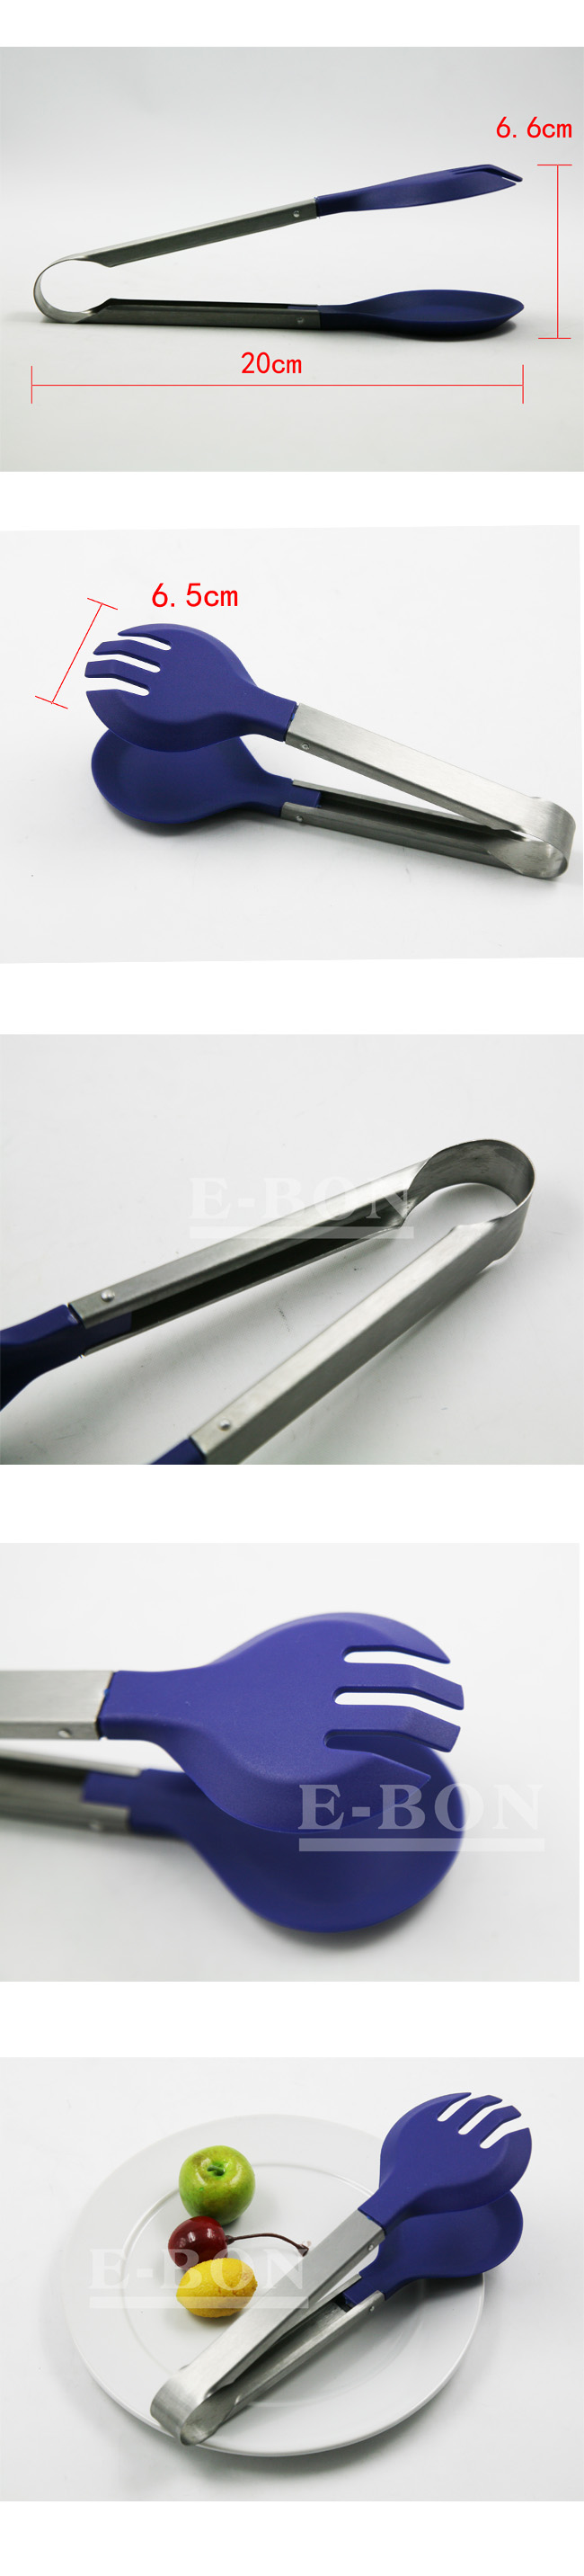 Stainless steel tong